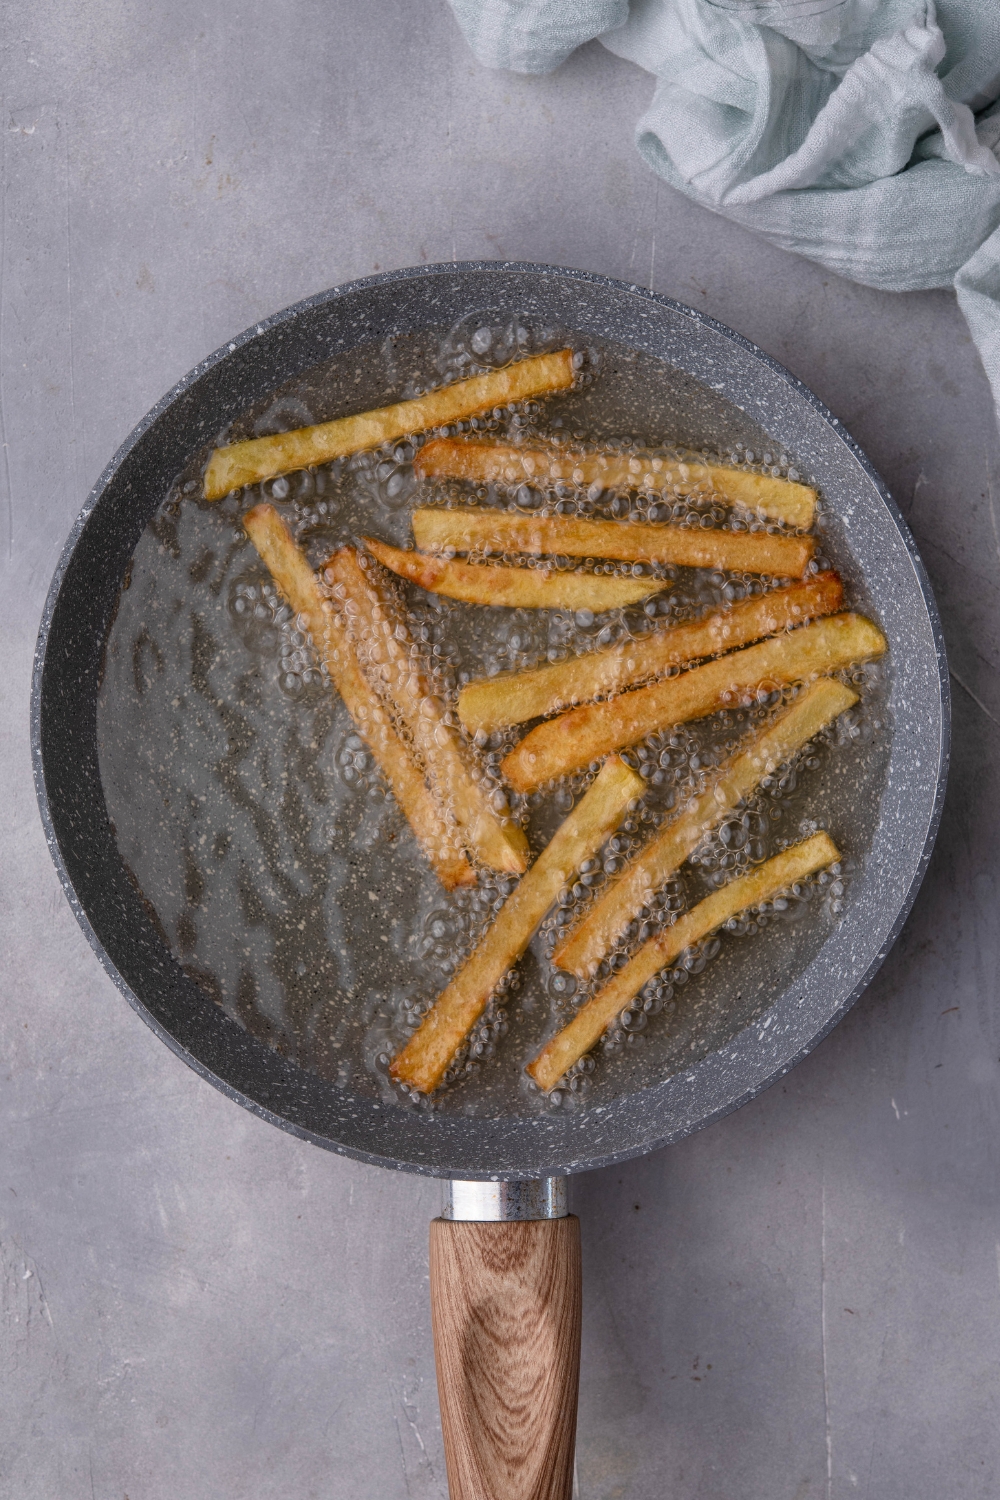 A pan of hot oil with a single layer of cut fries refrying.